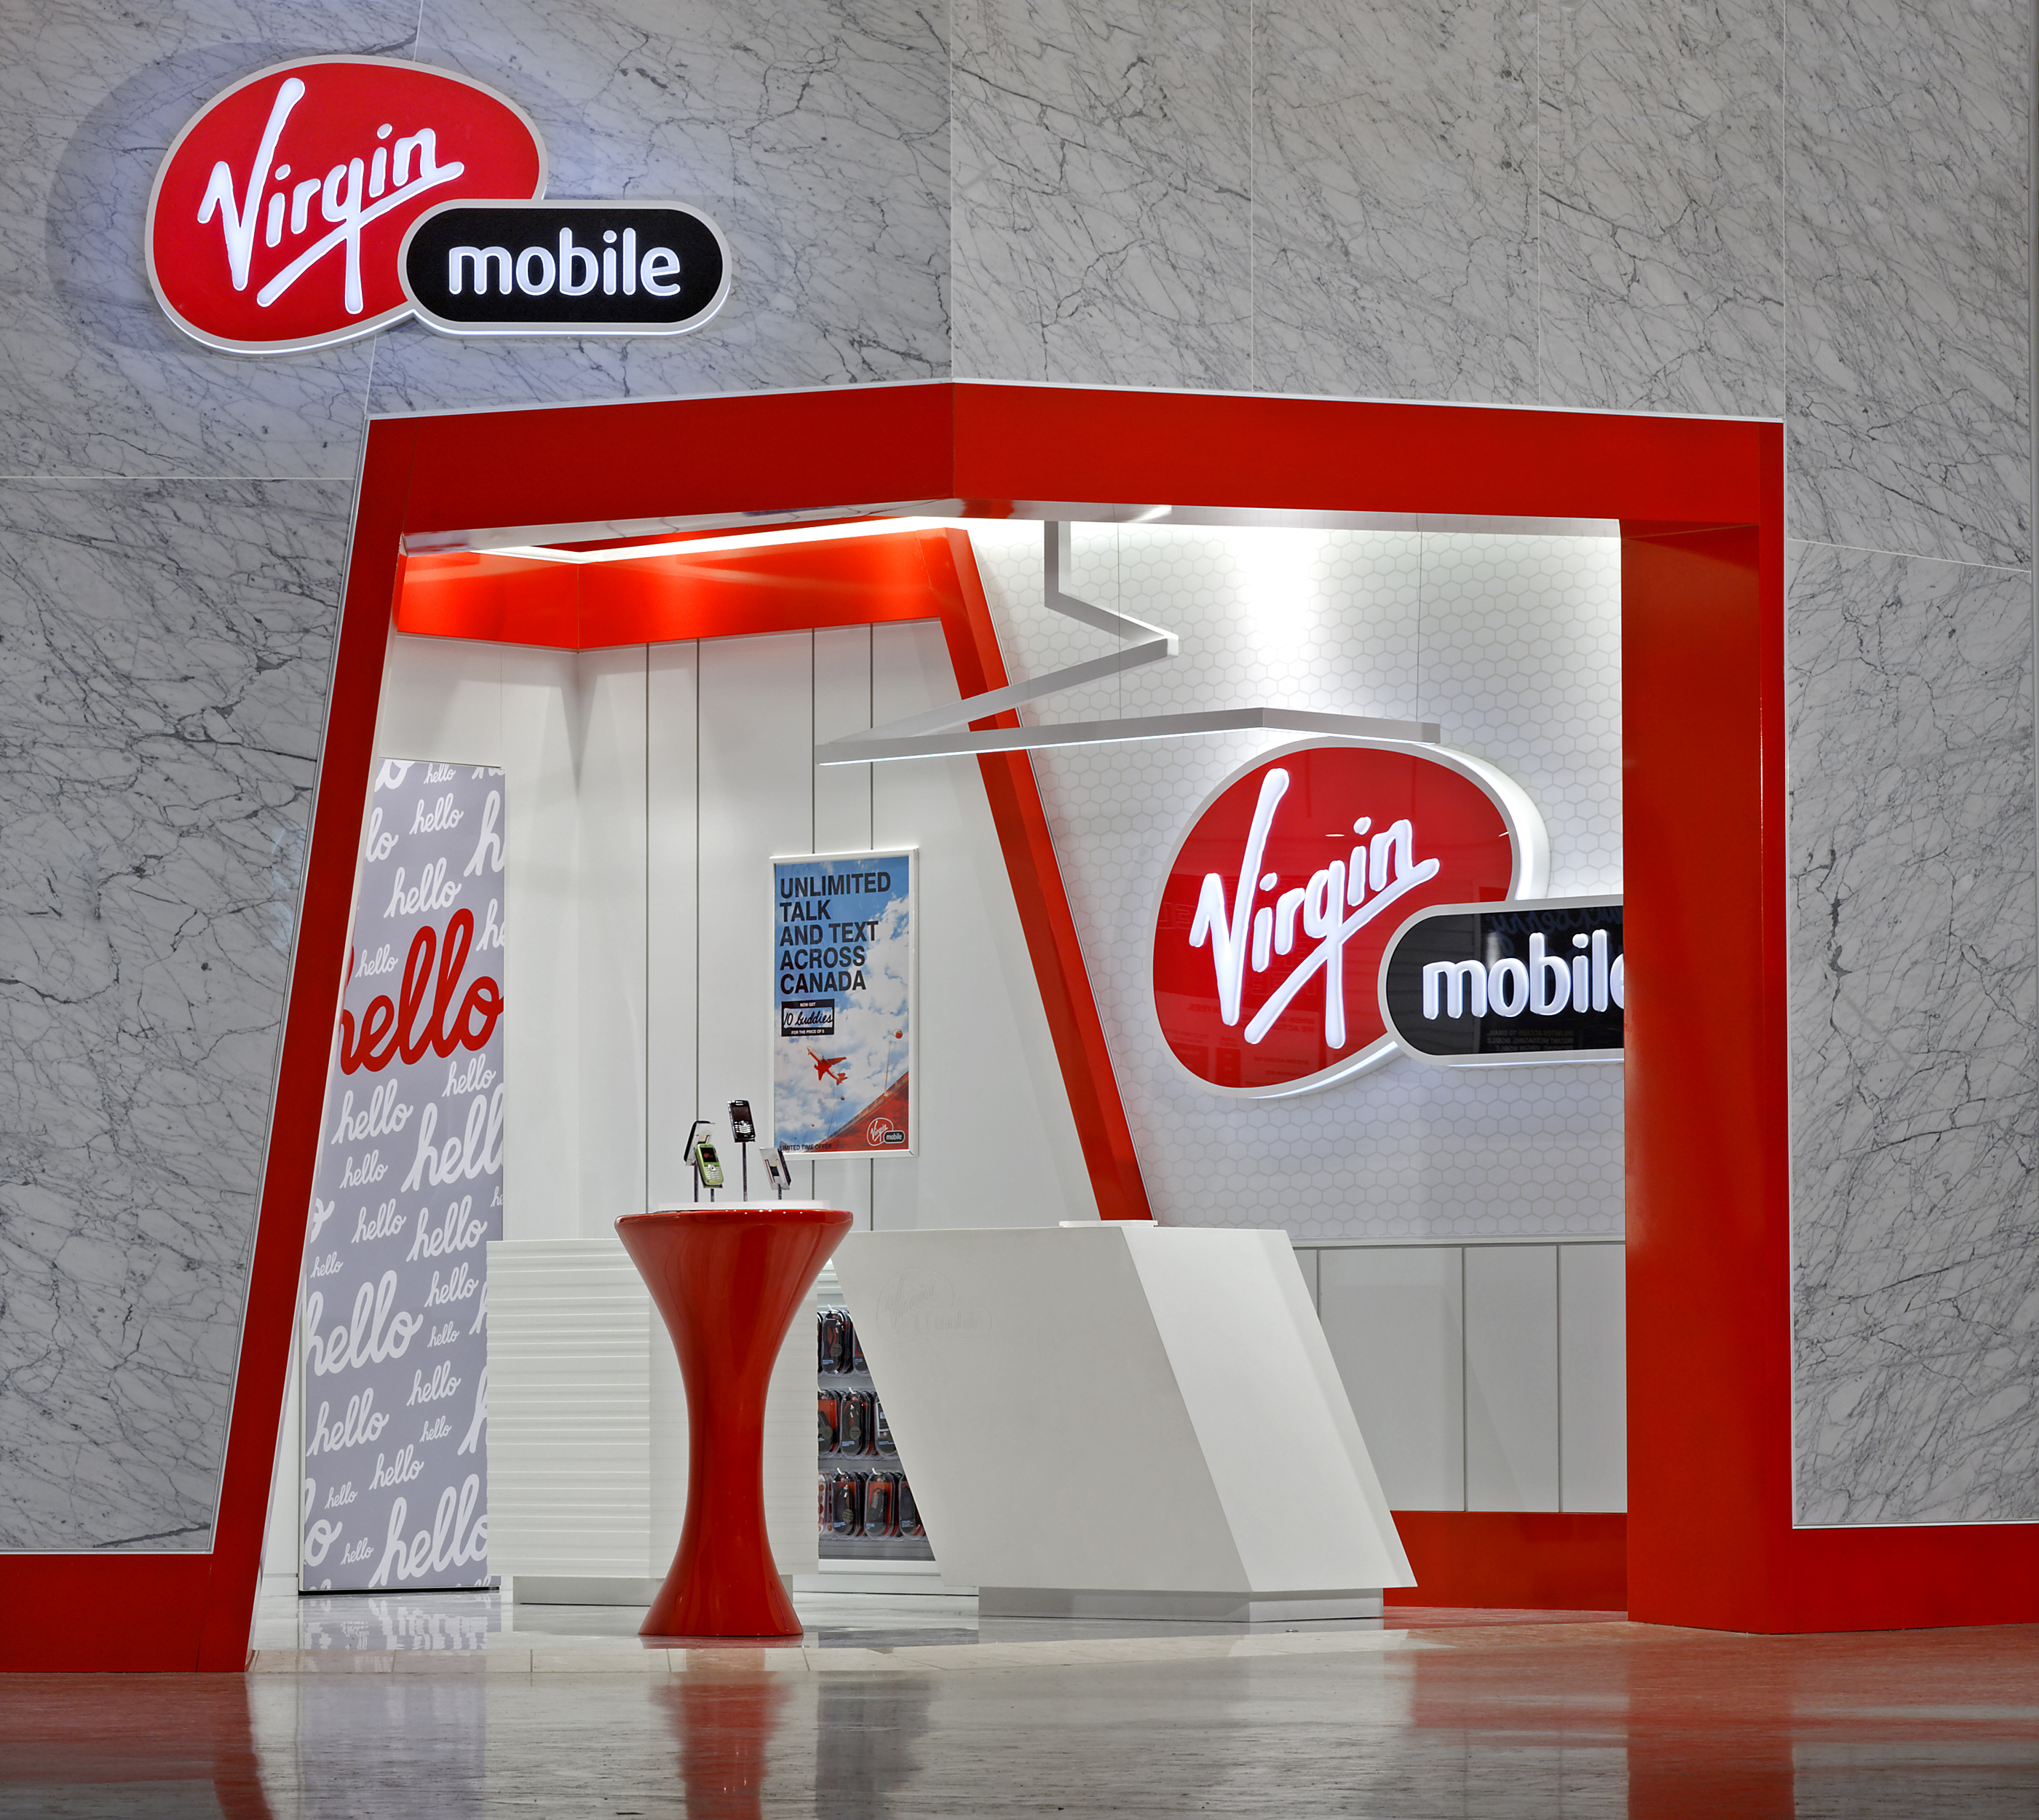 Essay on “Marketing Strategy and Plan for Virgin Mobile” | Examples and Samples